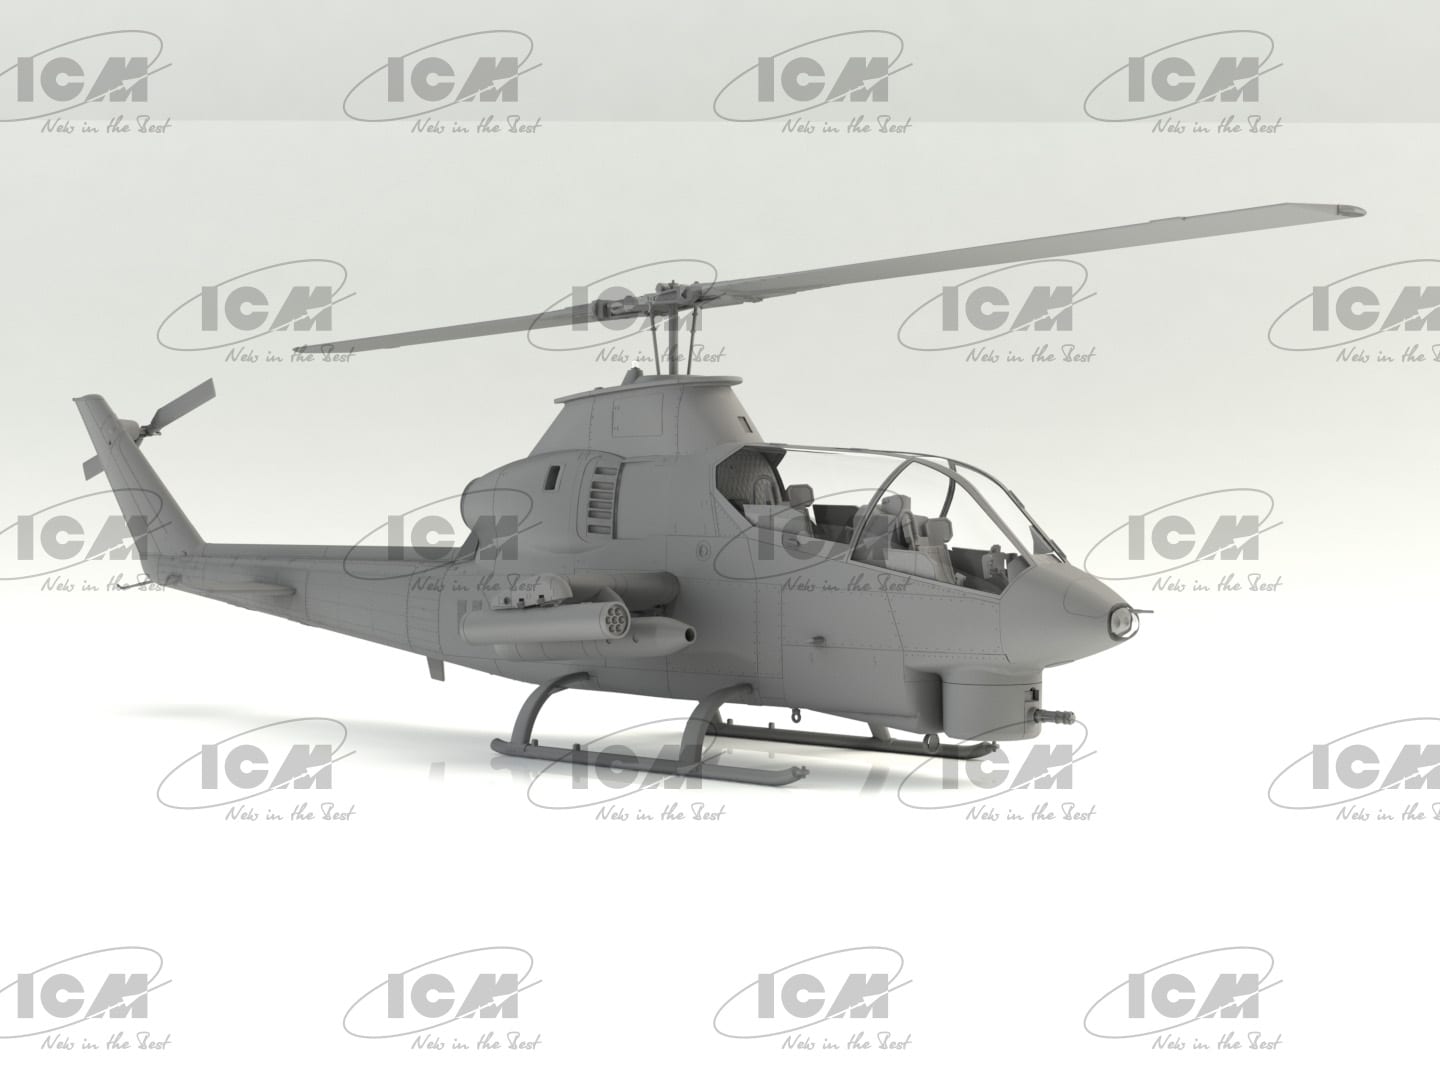 early Production ICM ICM Ah-1g Cobra Us Attack Helicopter Icm 